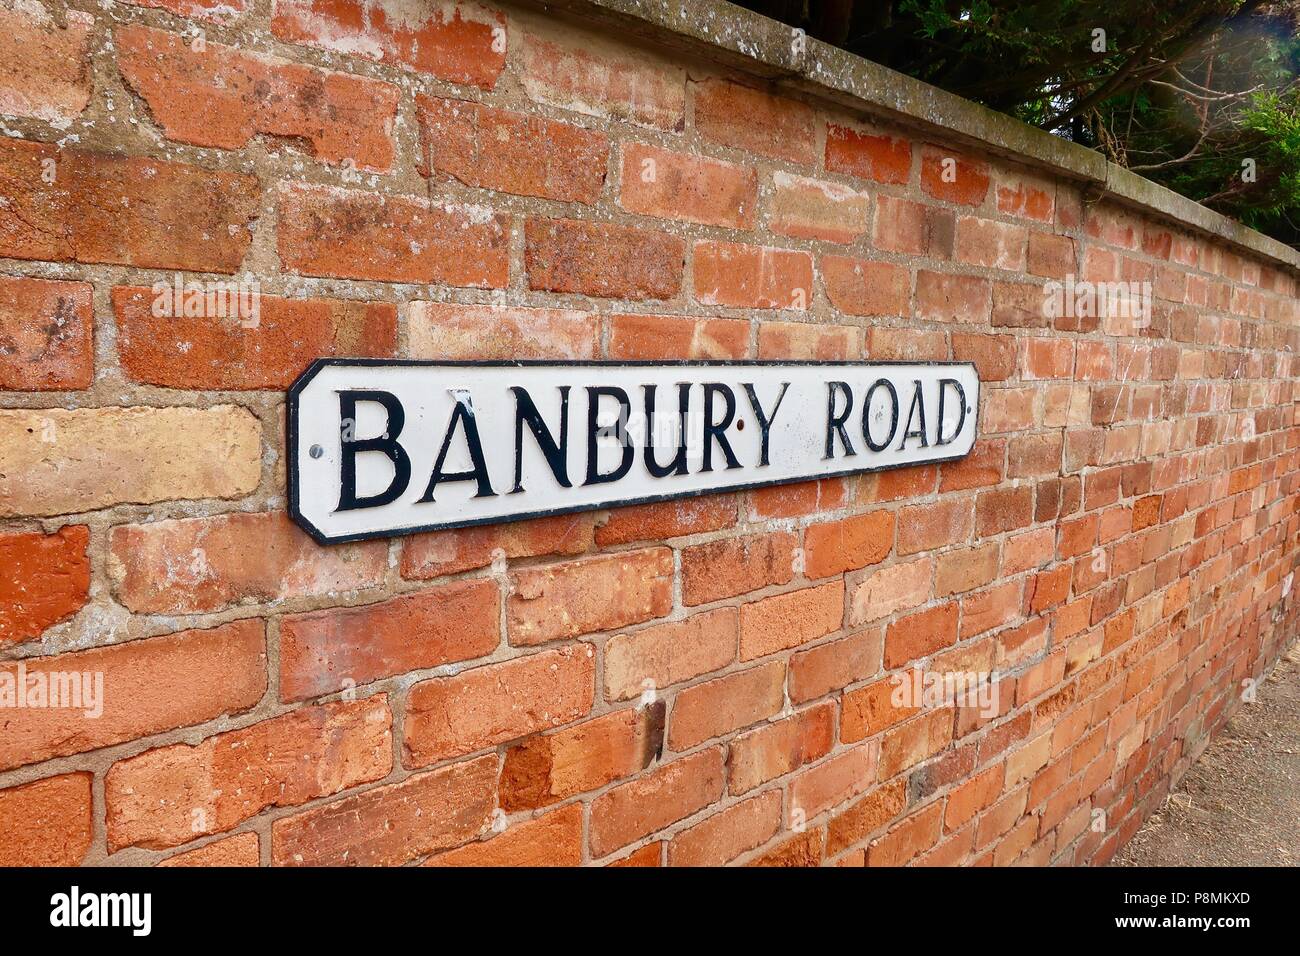 Banbury Road - sign on a red brick wall in Kineton, Warks. Stock Photo